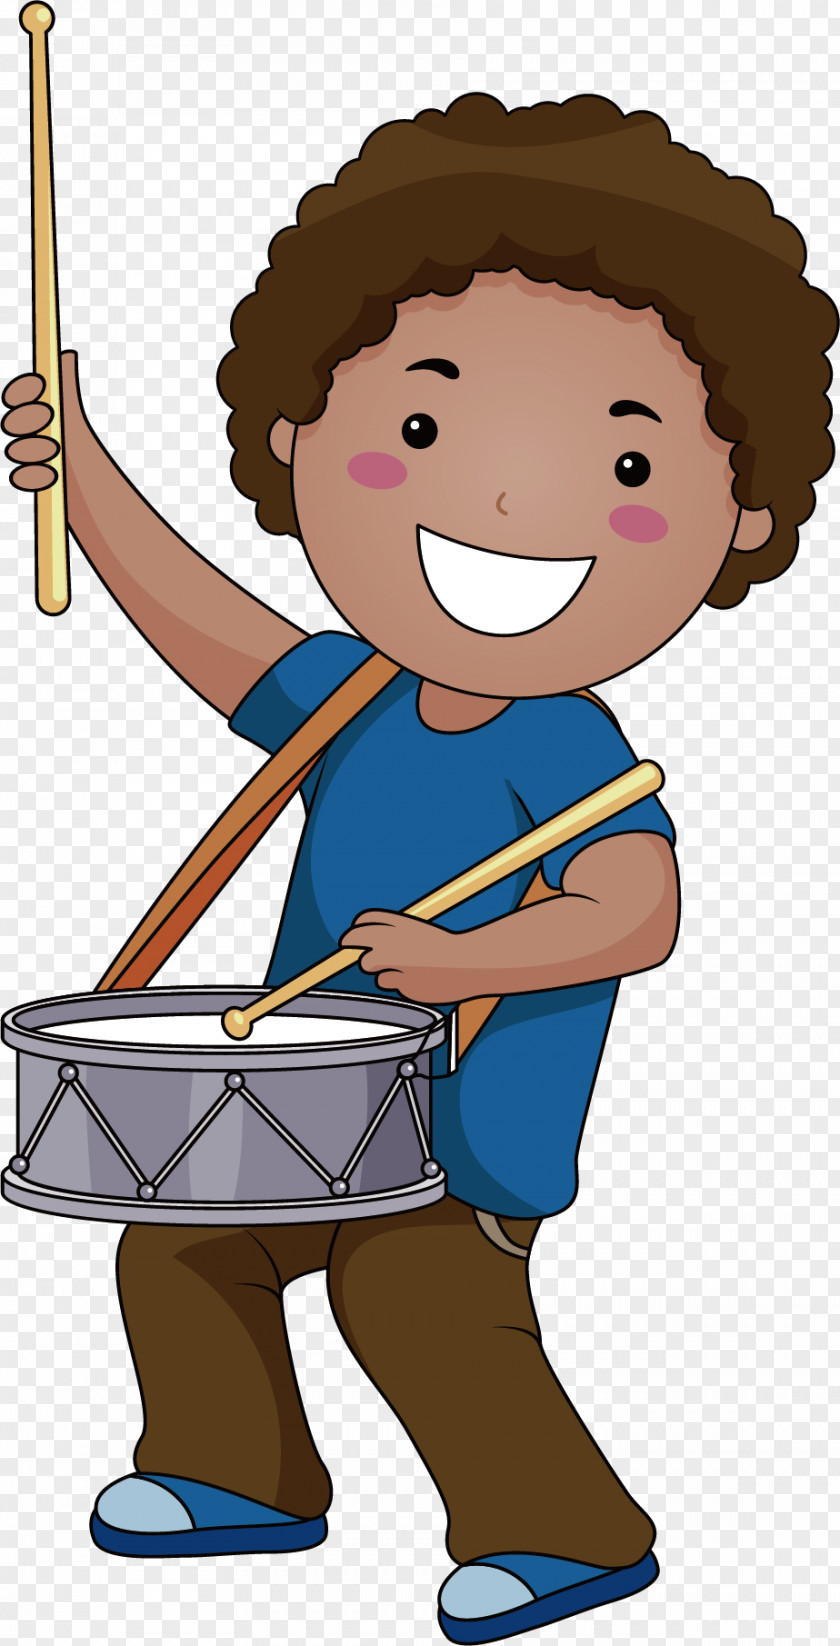 Drum Boy Cartoon Poster Promotional Material Musical Instrument Drawing Clip Art PNG